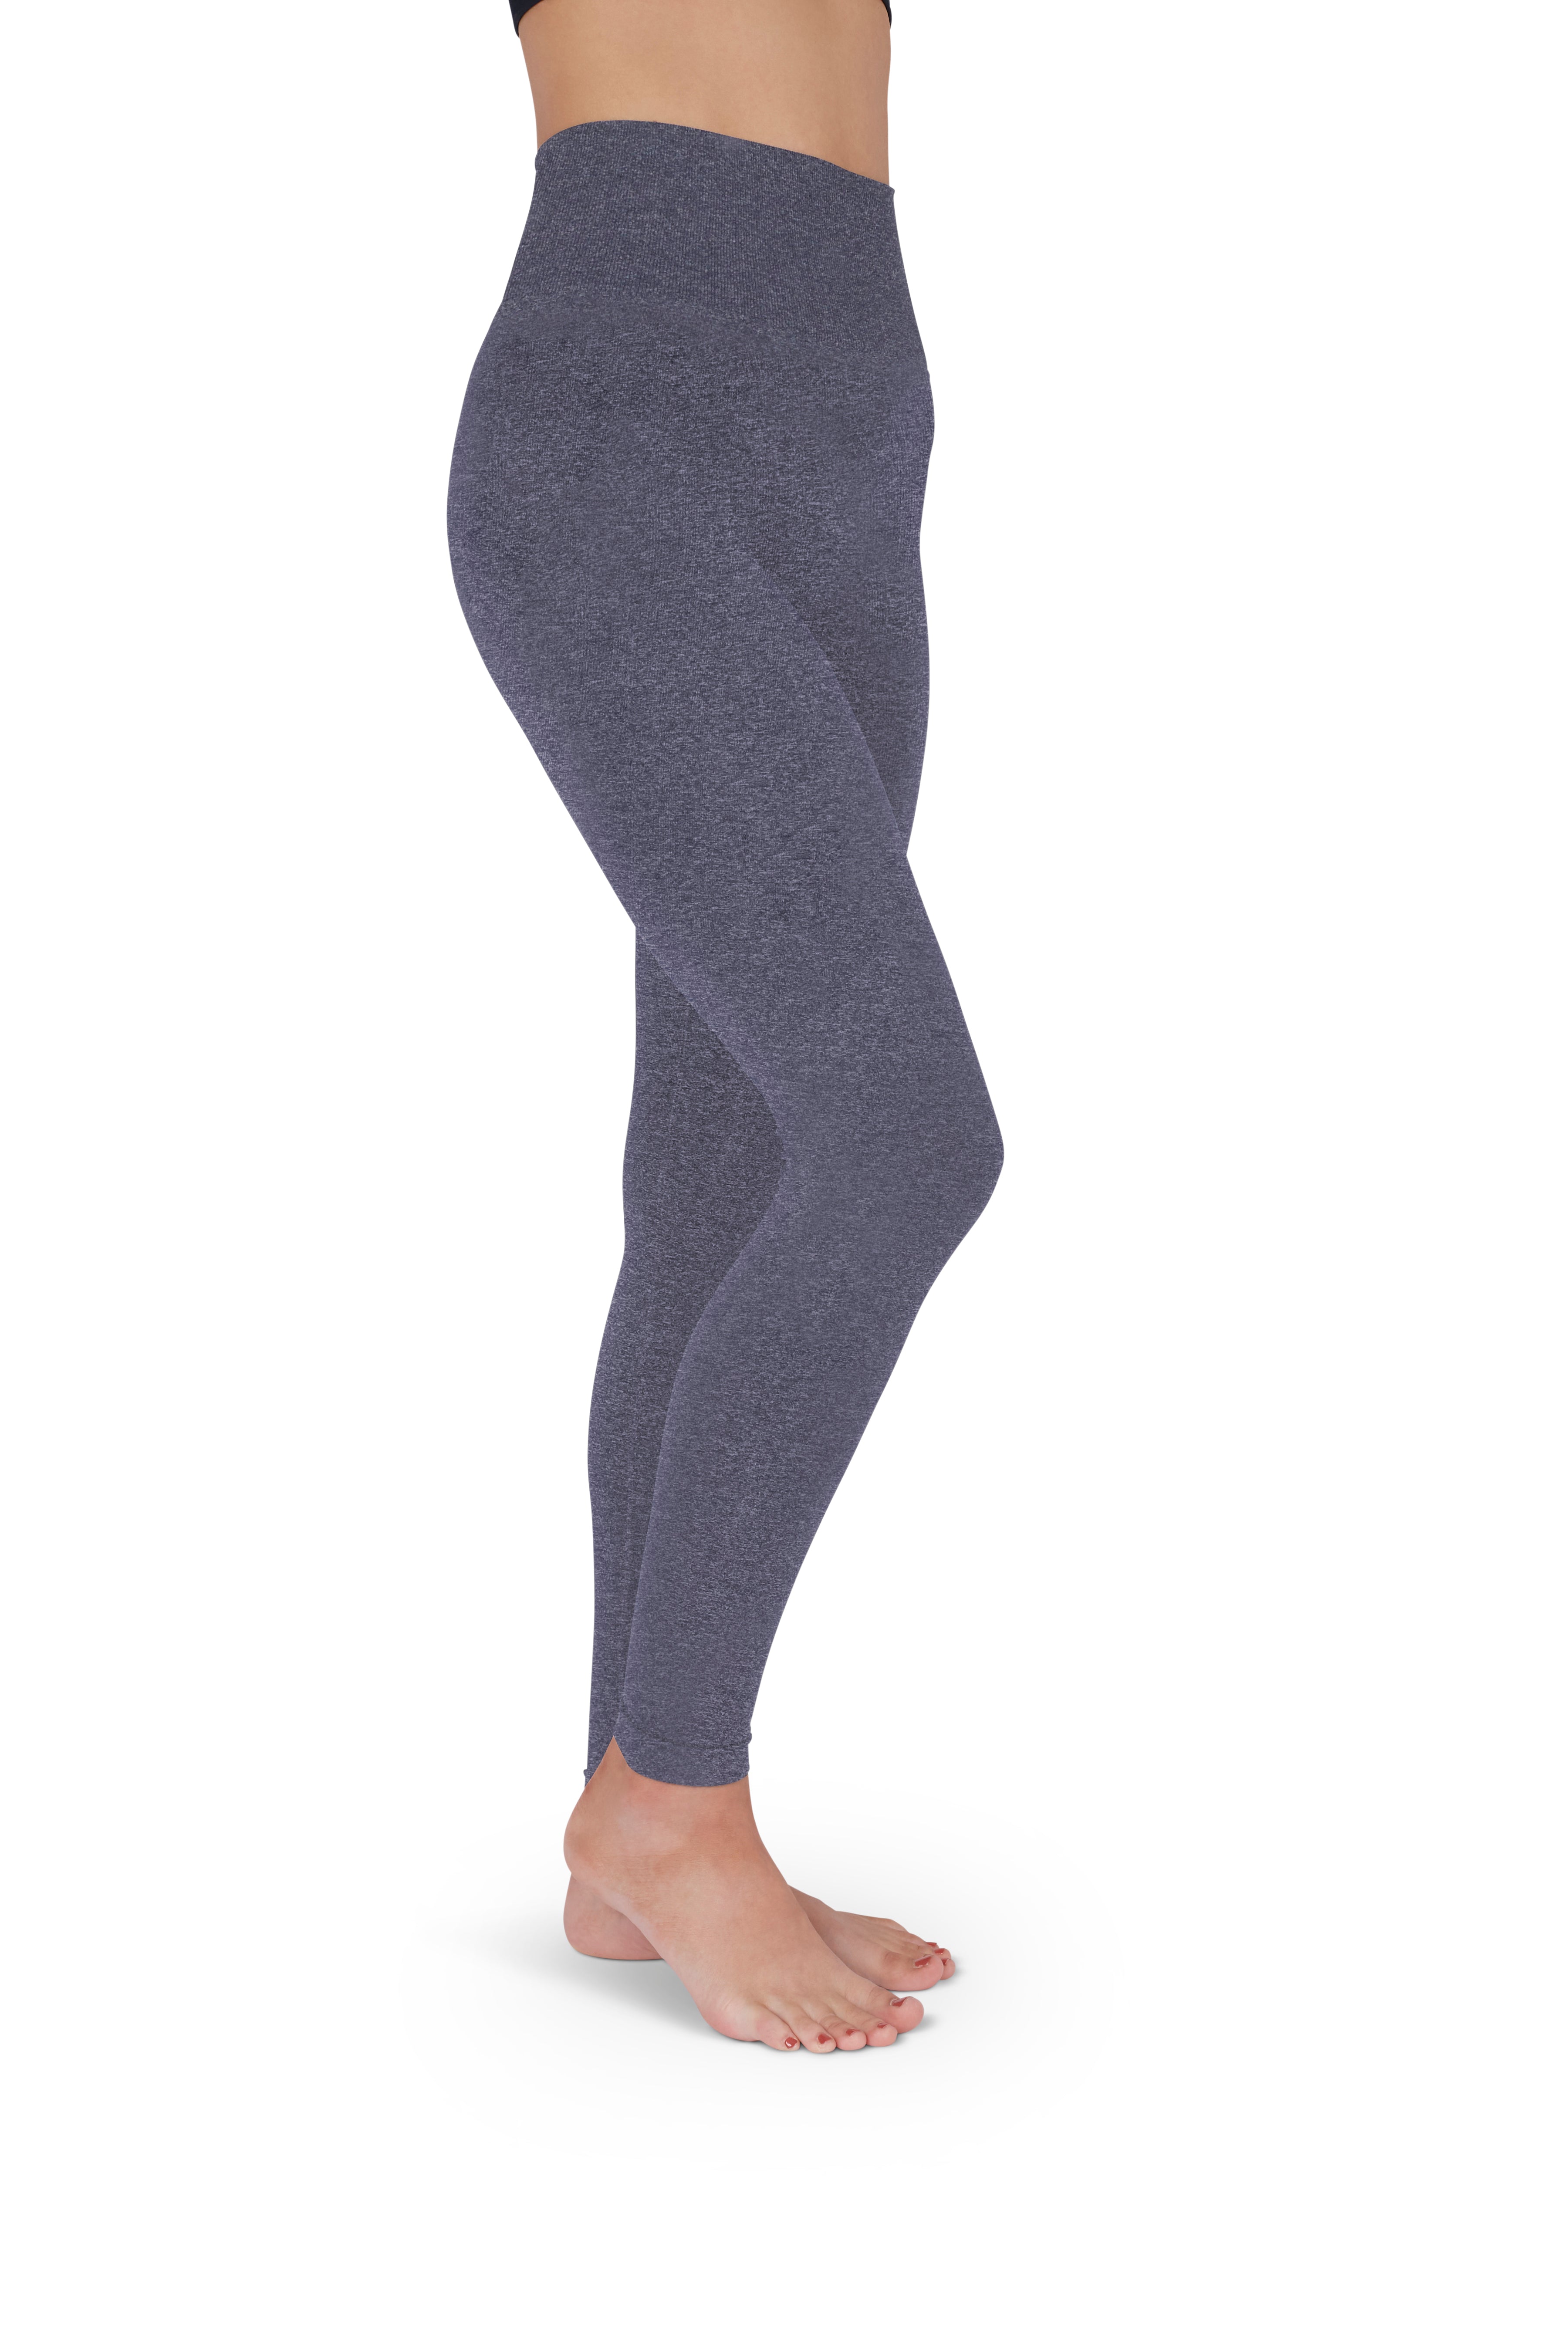 Footless Compression Leggings: Fashion vs. Medical, Key Features & How –  REJUVA Health